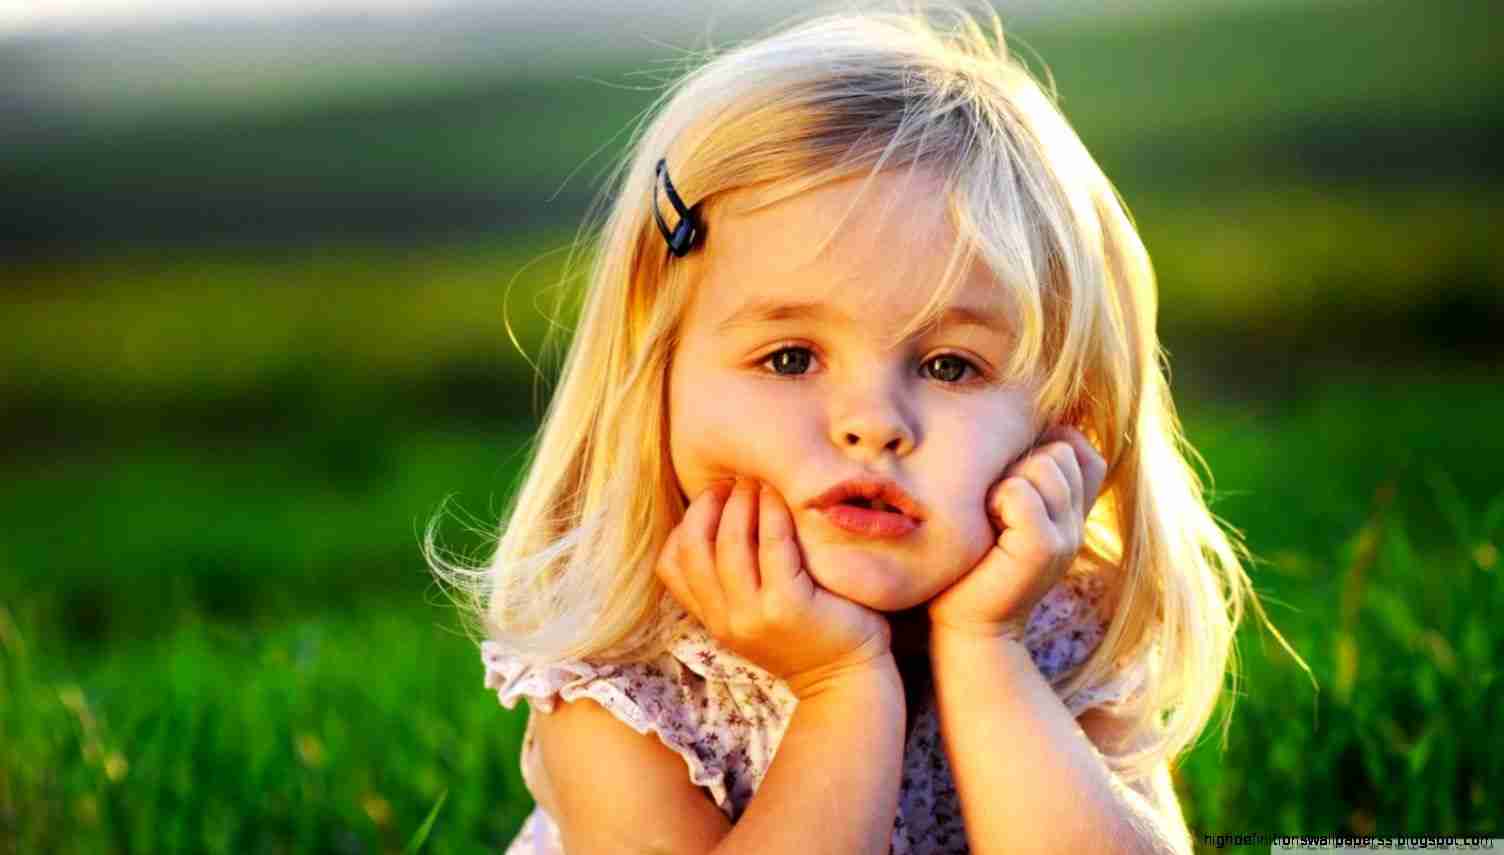 indian cute baby hd wallpaper,people in nature,child,face,hair,facial expression